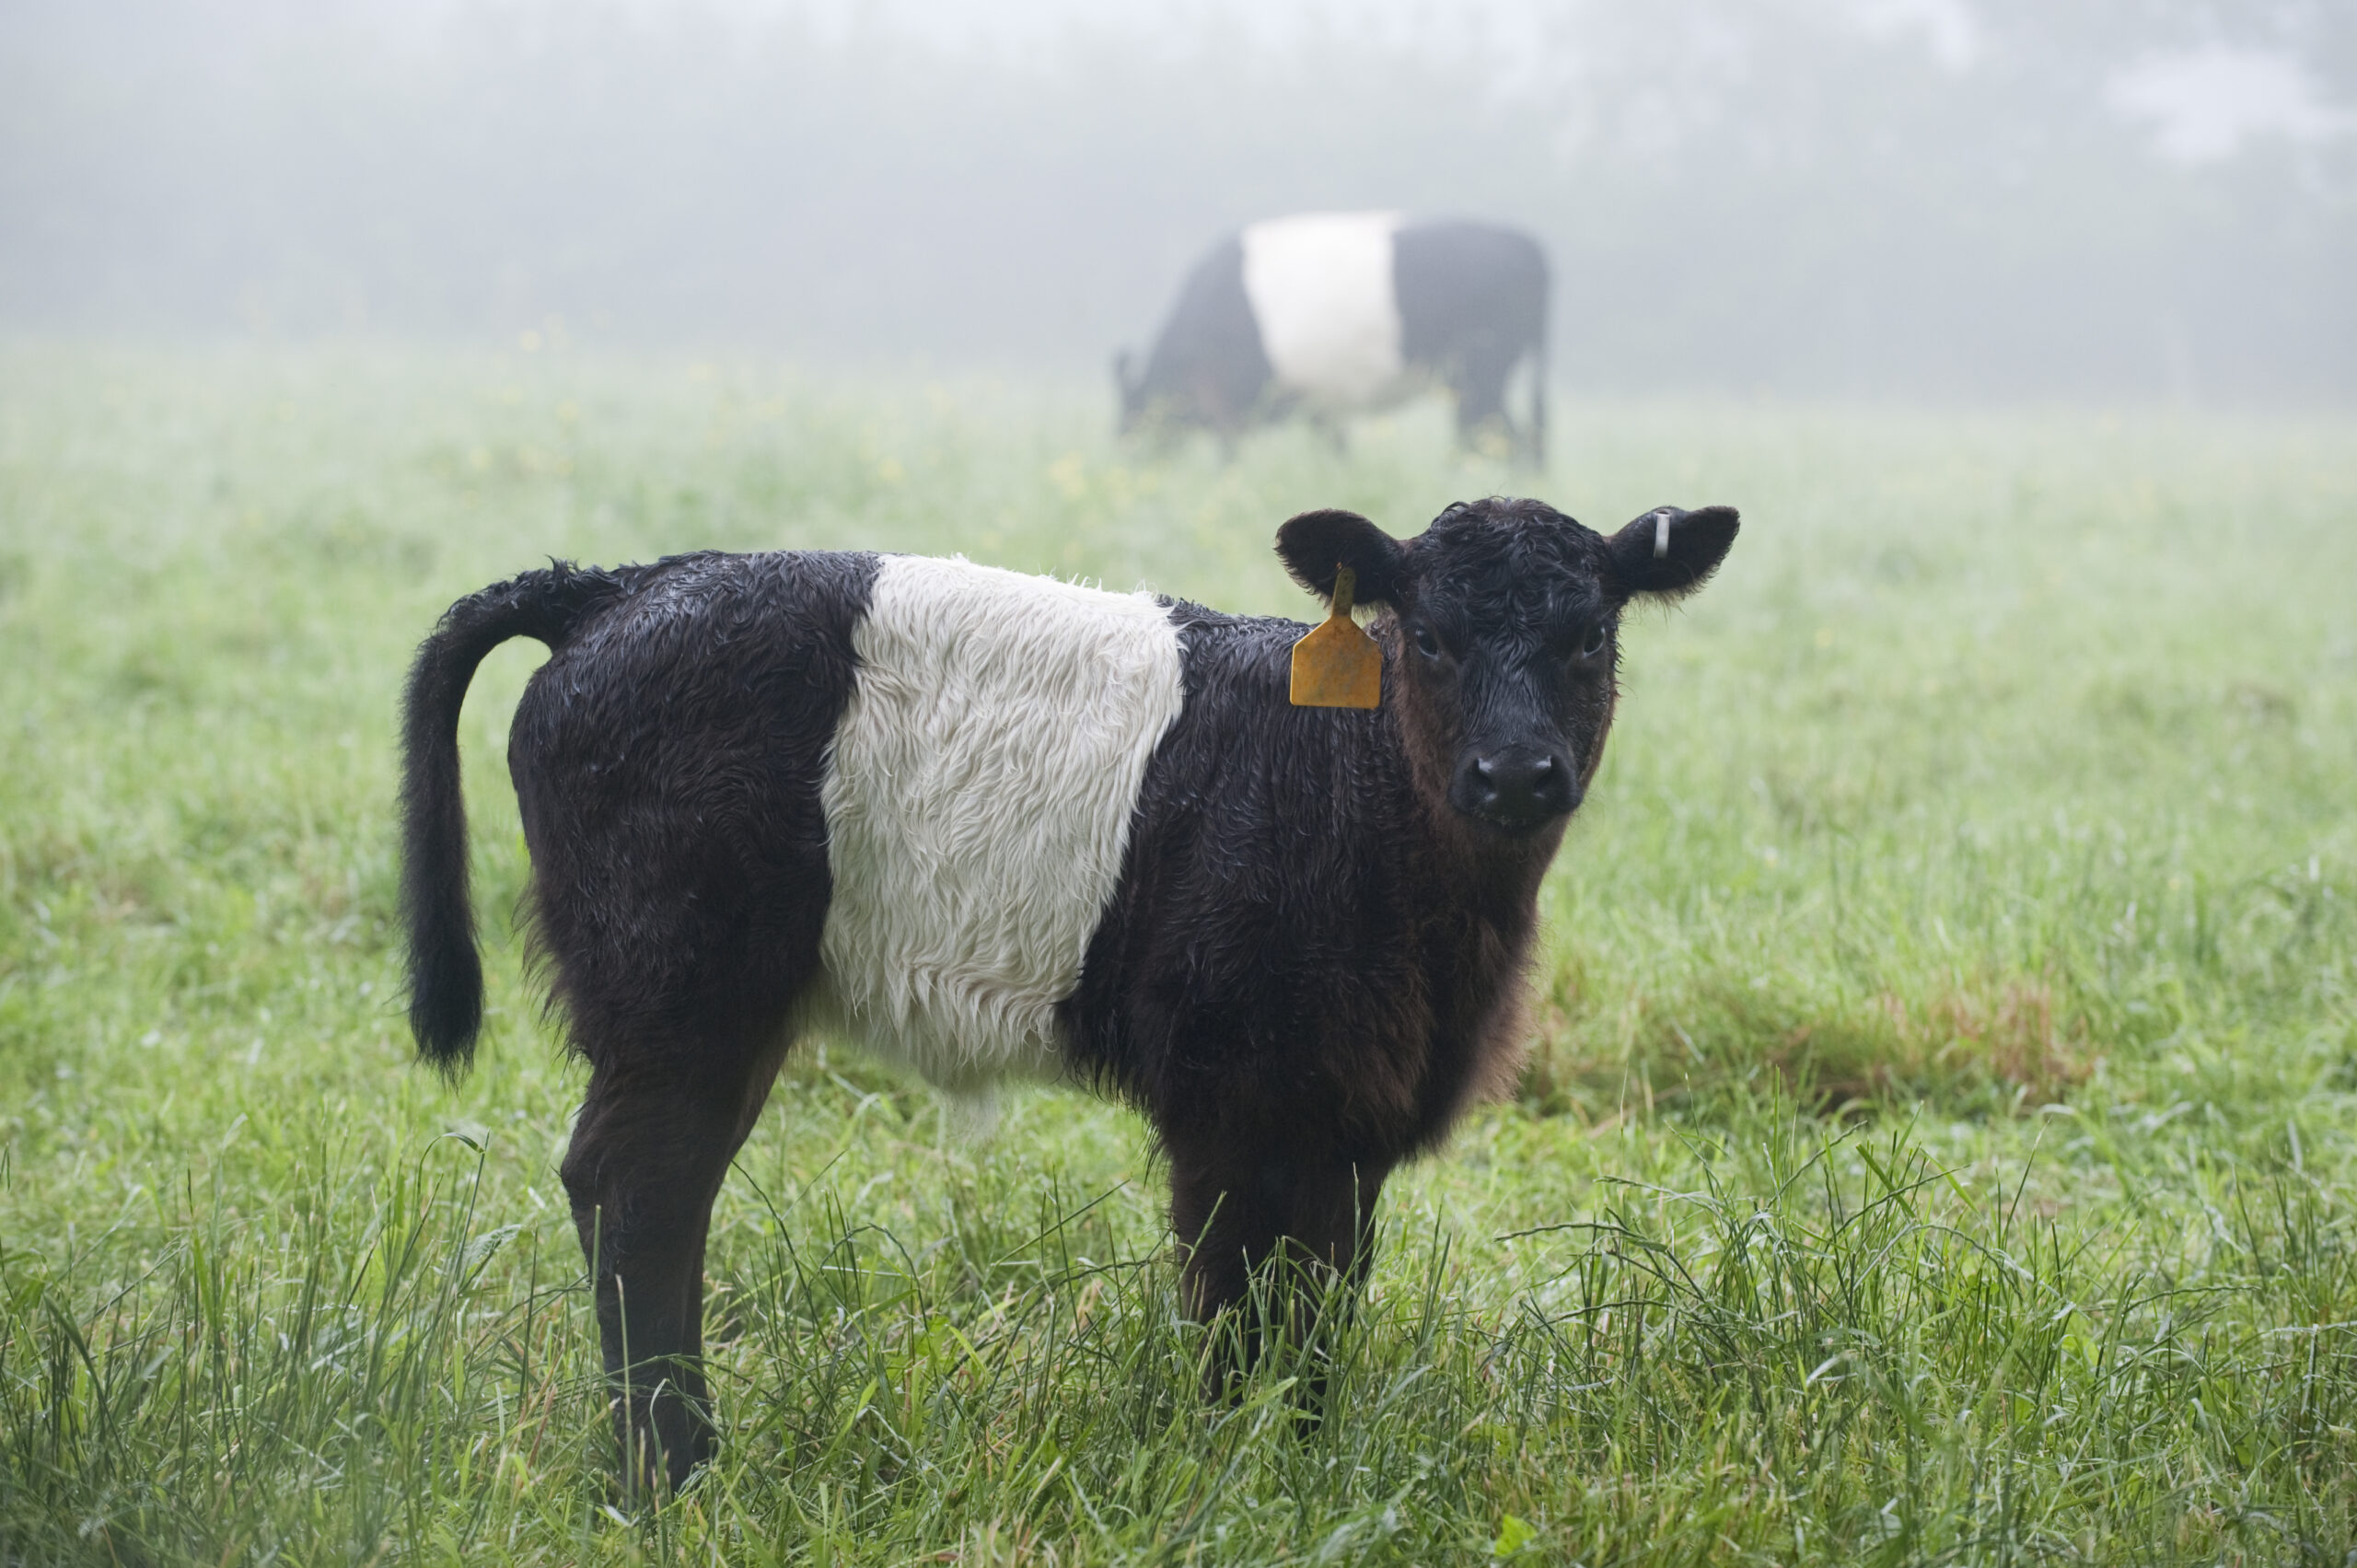 A young striped belted Galloway calf stands in a foggy field.